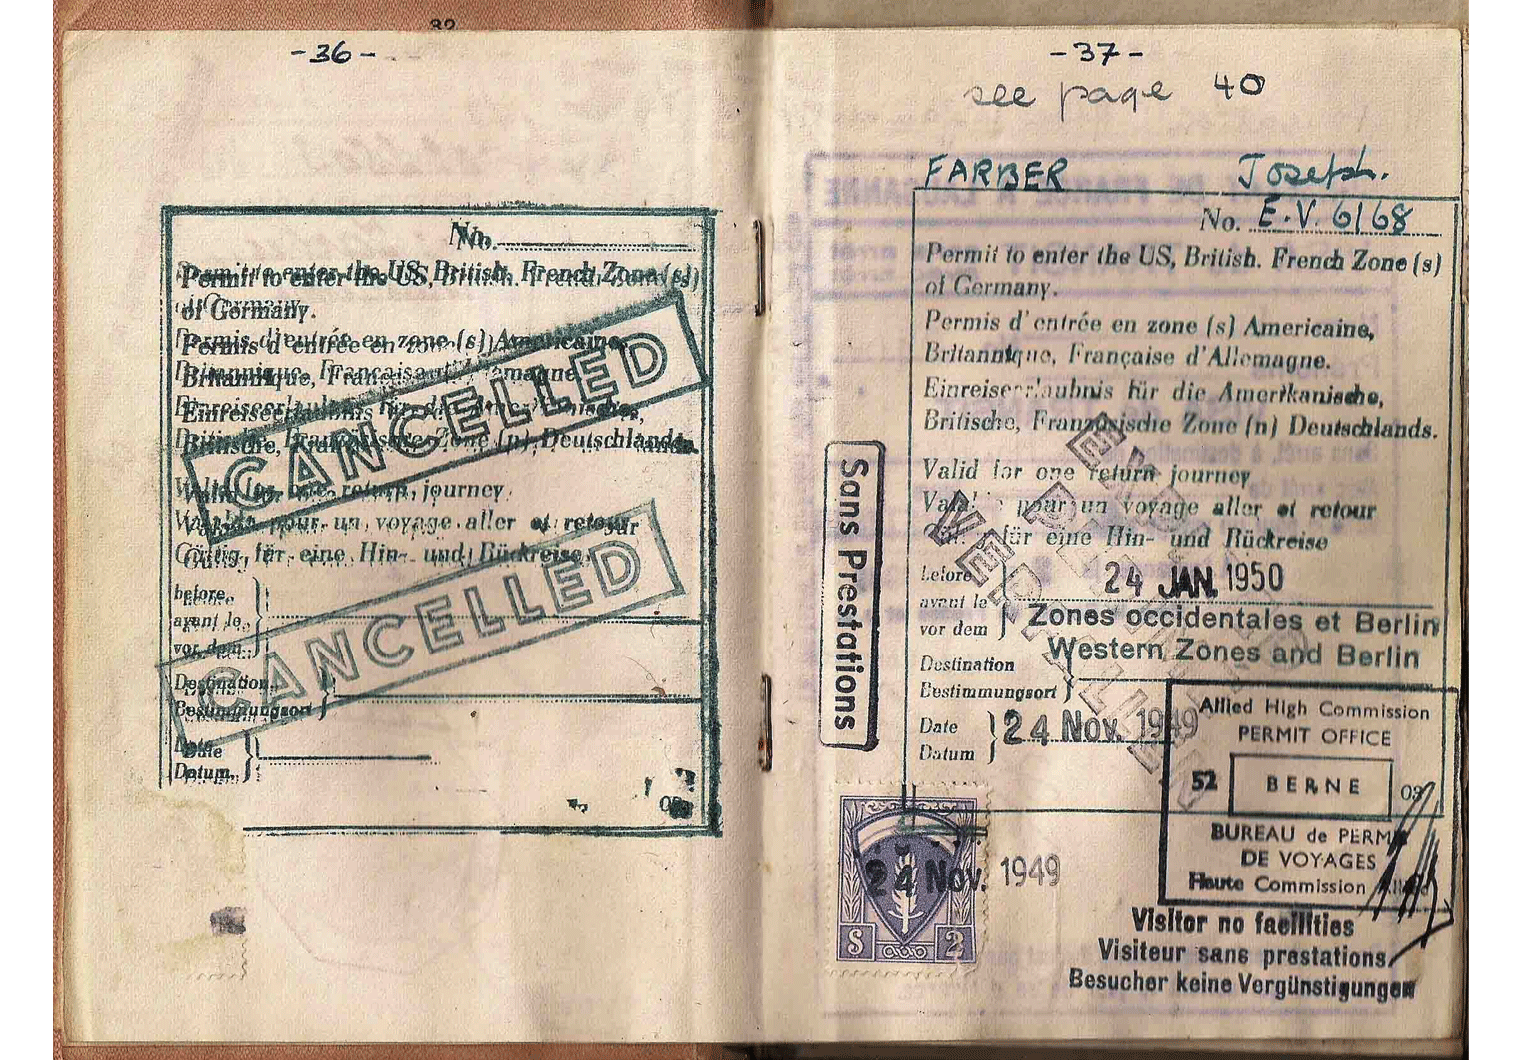 Allied Military Government (AMG) visa